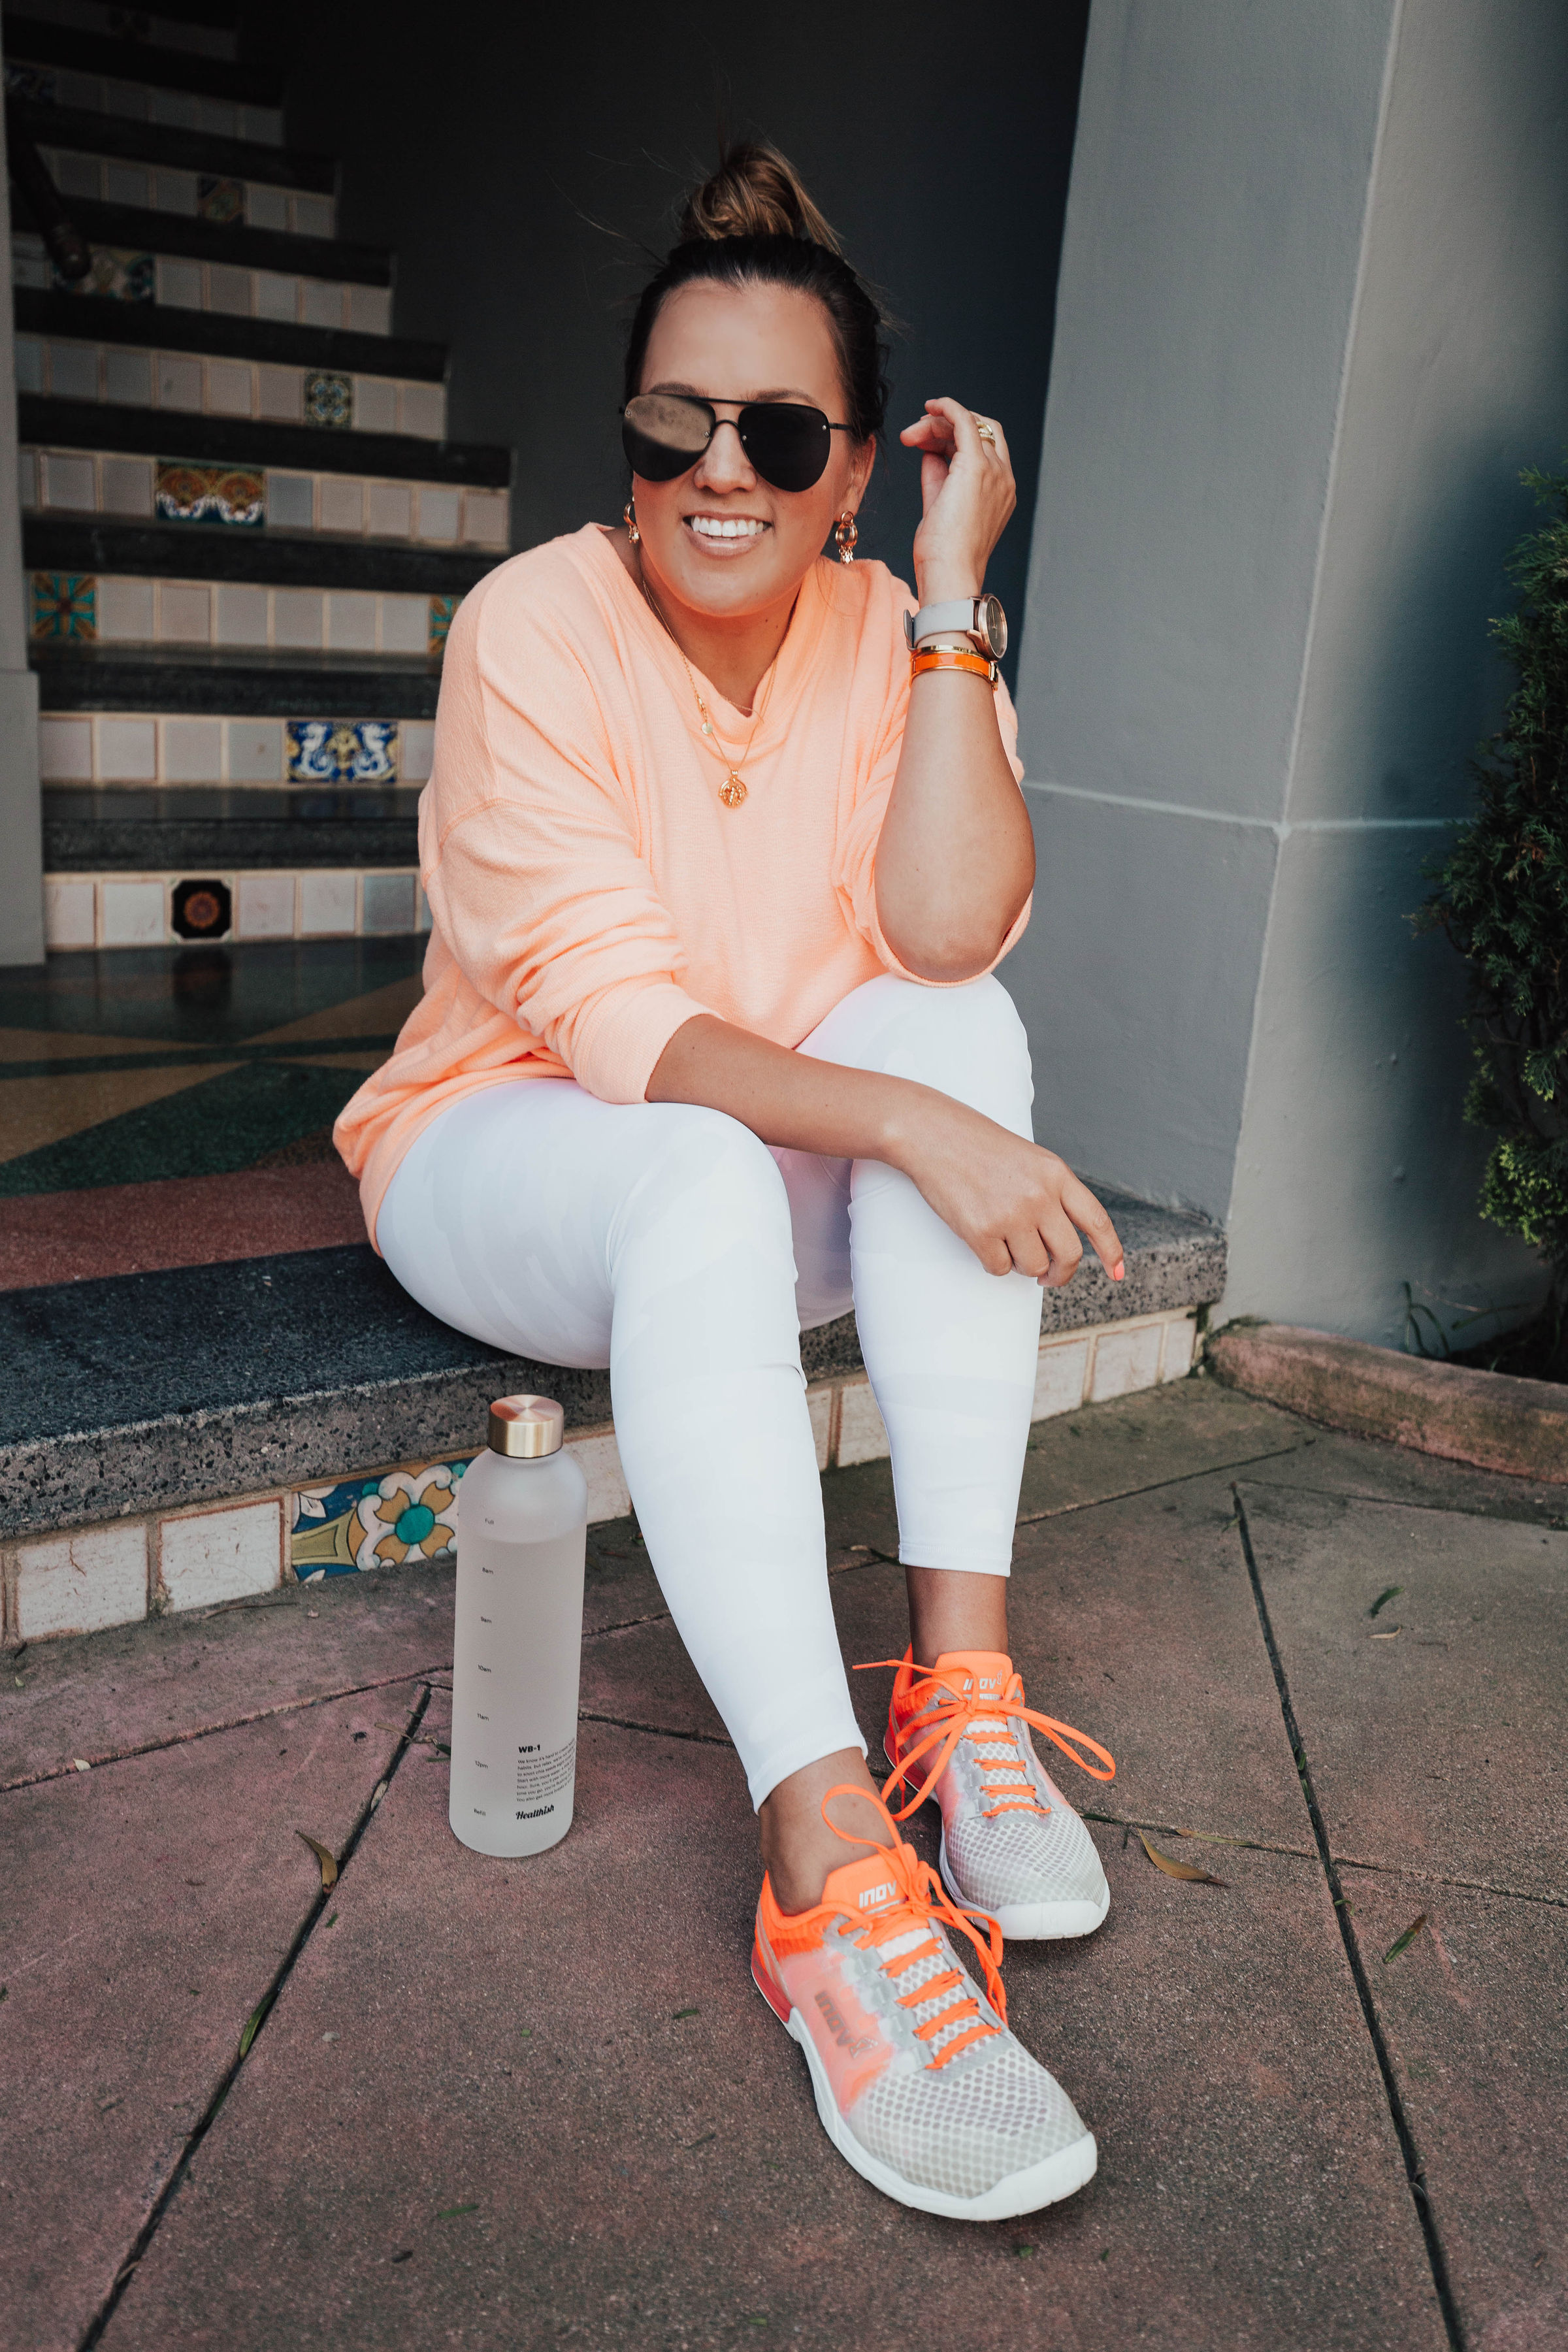 San Francisco blogger Ashley Zeal from Two Peas in a Prada shares her new neon sneakers. She is sharing why these shoes from Inov-8 make for the perfect cross trainer!